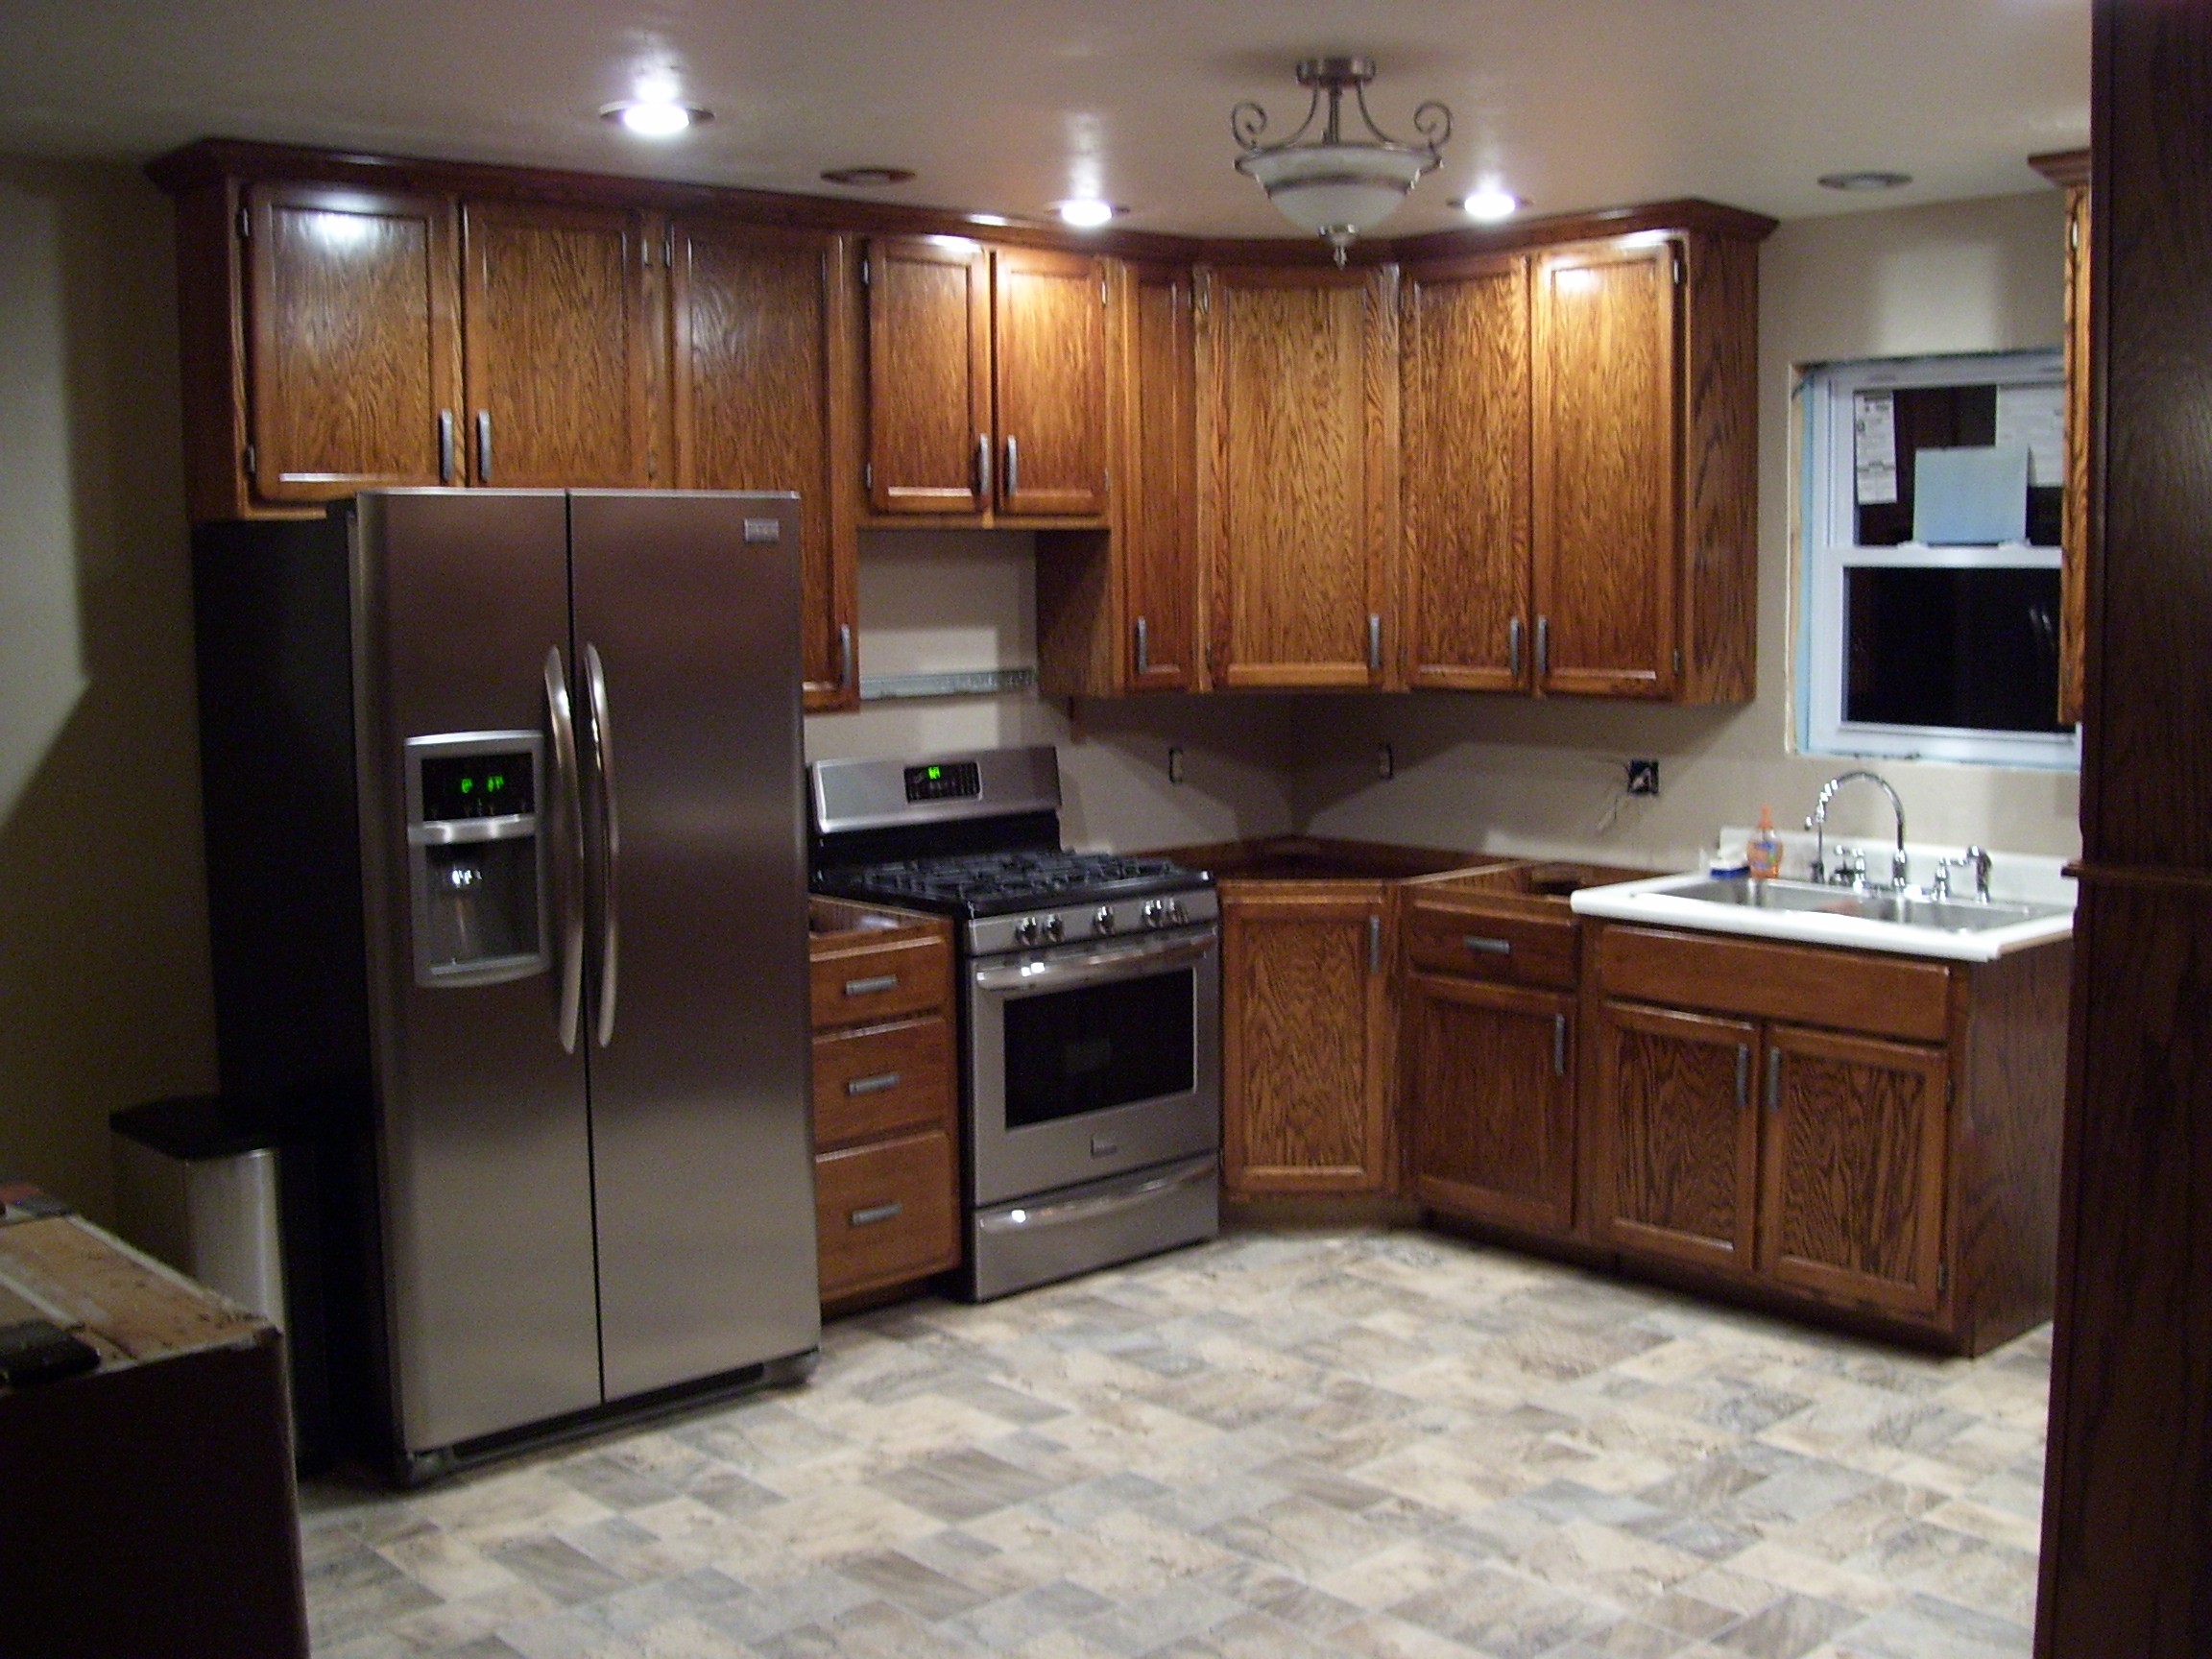 Custom Made Cabinets in Kitchen